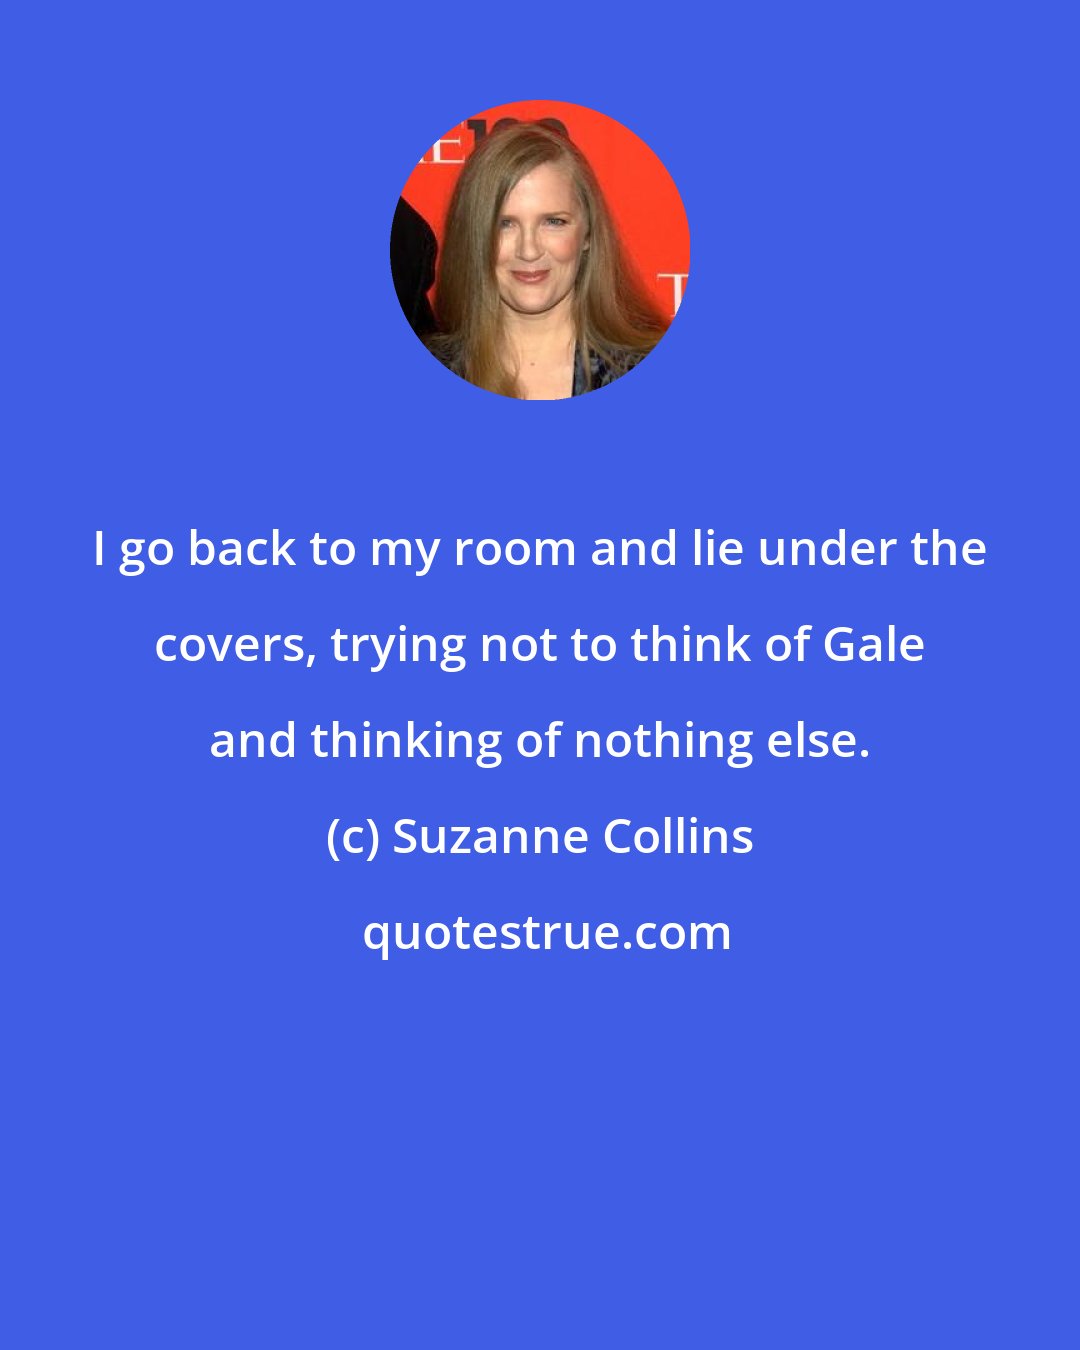 Suzanne Collins: I go back to my room and lie under the covers, trying not to think of Gale and thinking of nothing else.